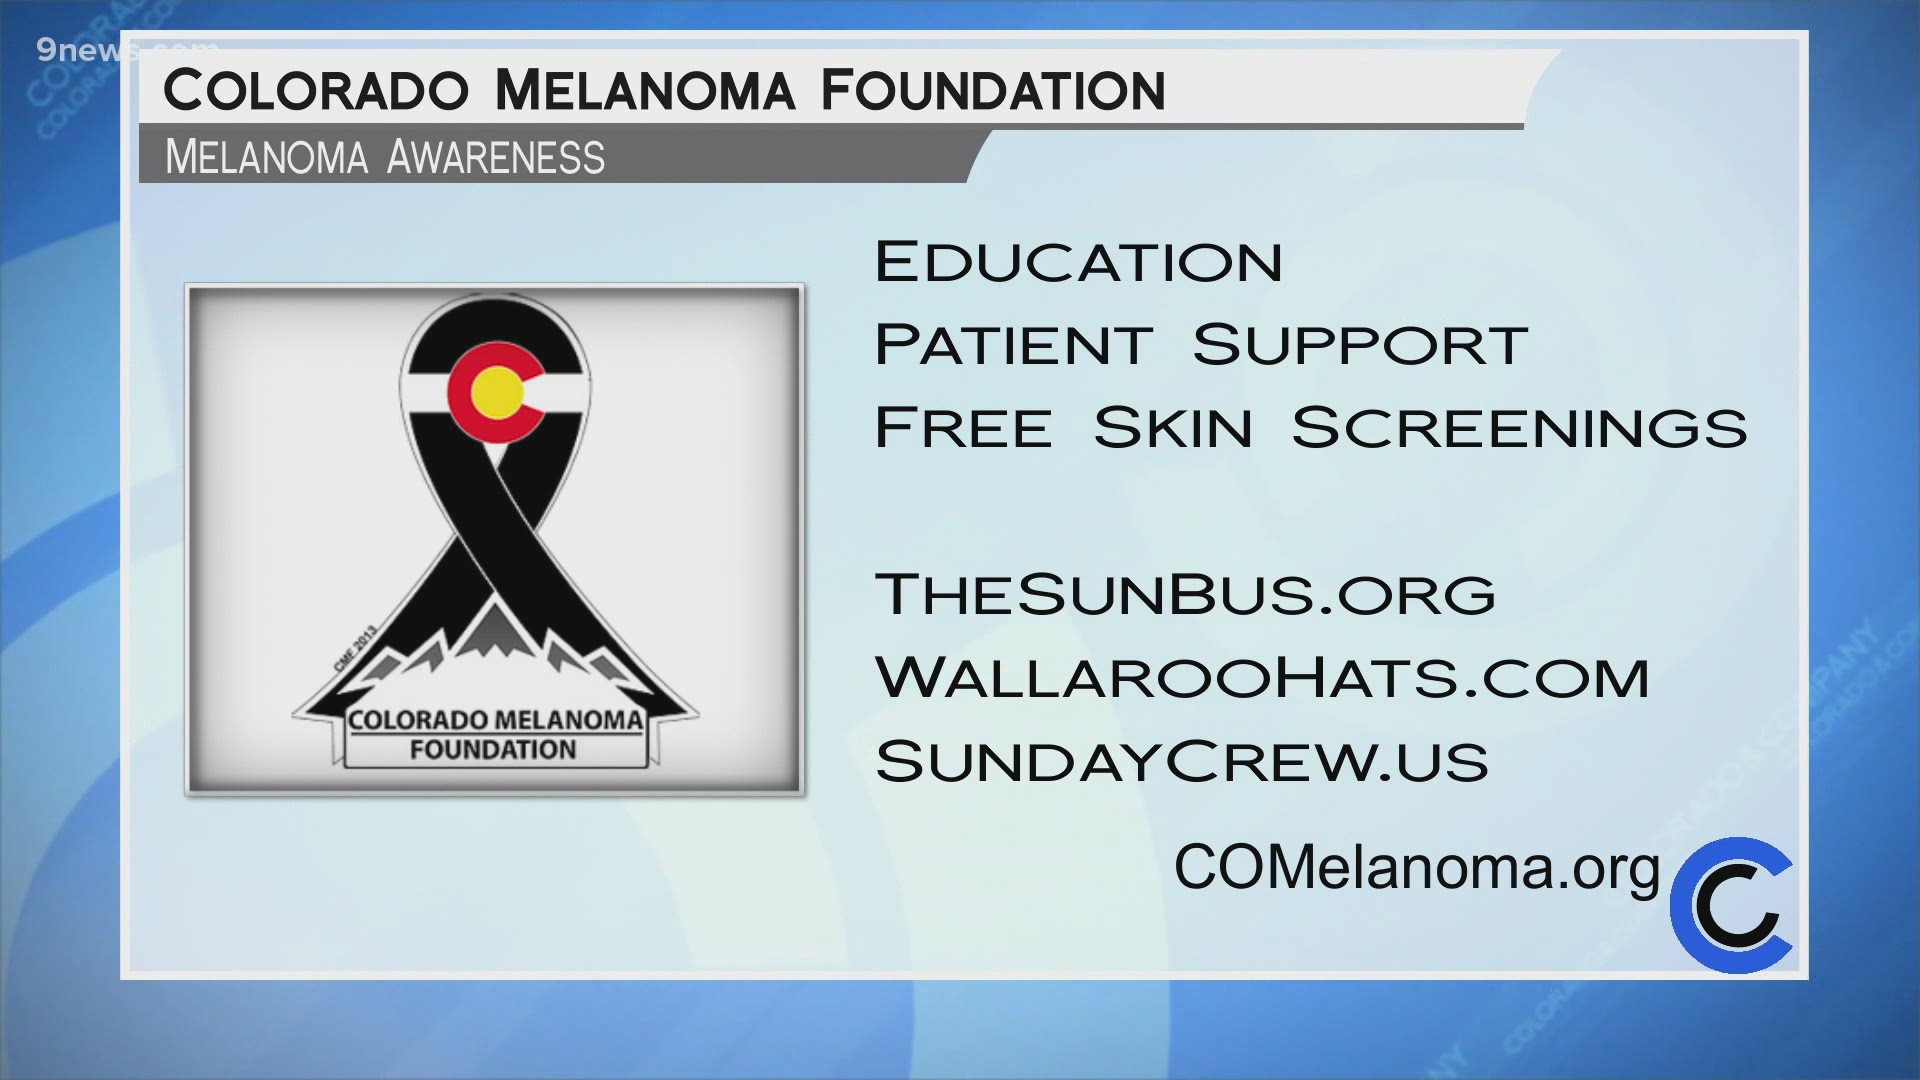 Learn sun safety tips and resources at COMelanoma.org and find out how you can reduce your risk of skin cancer.